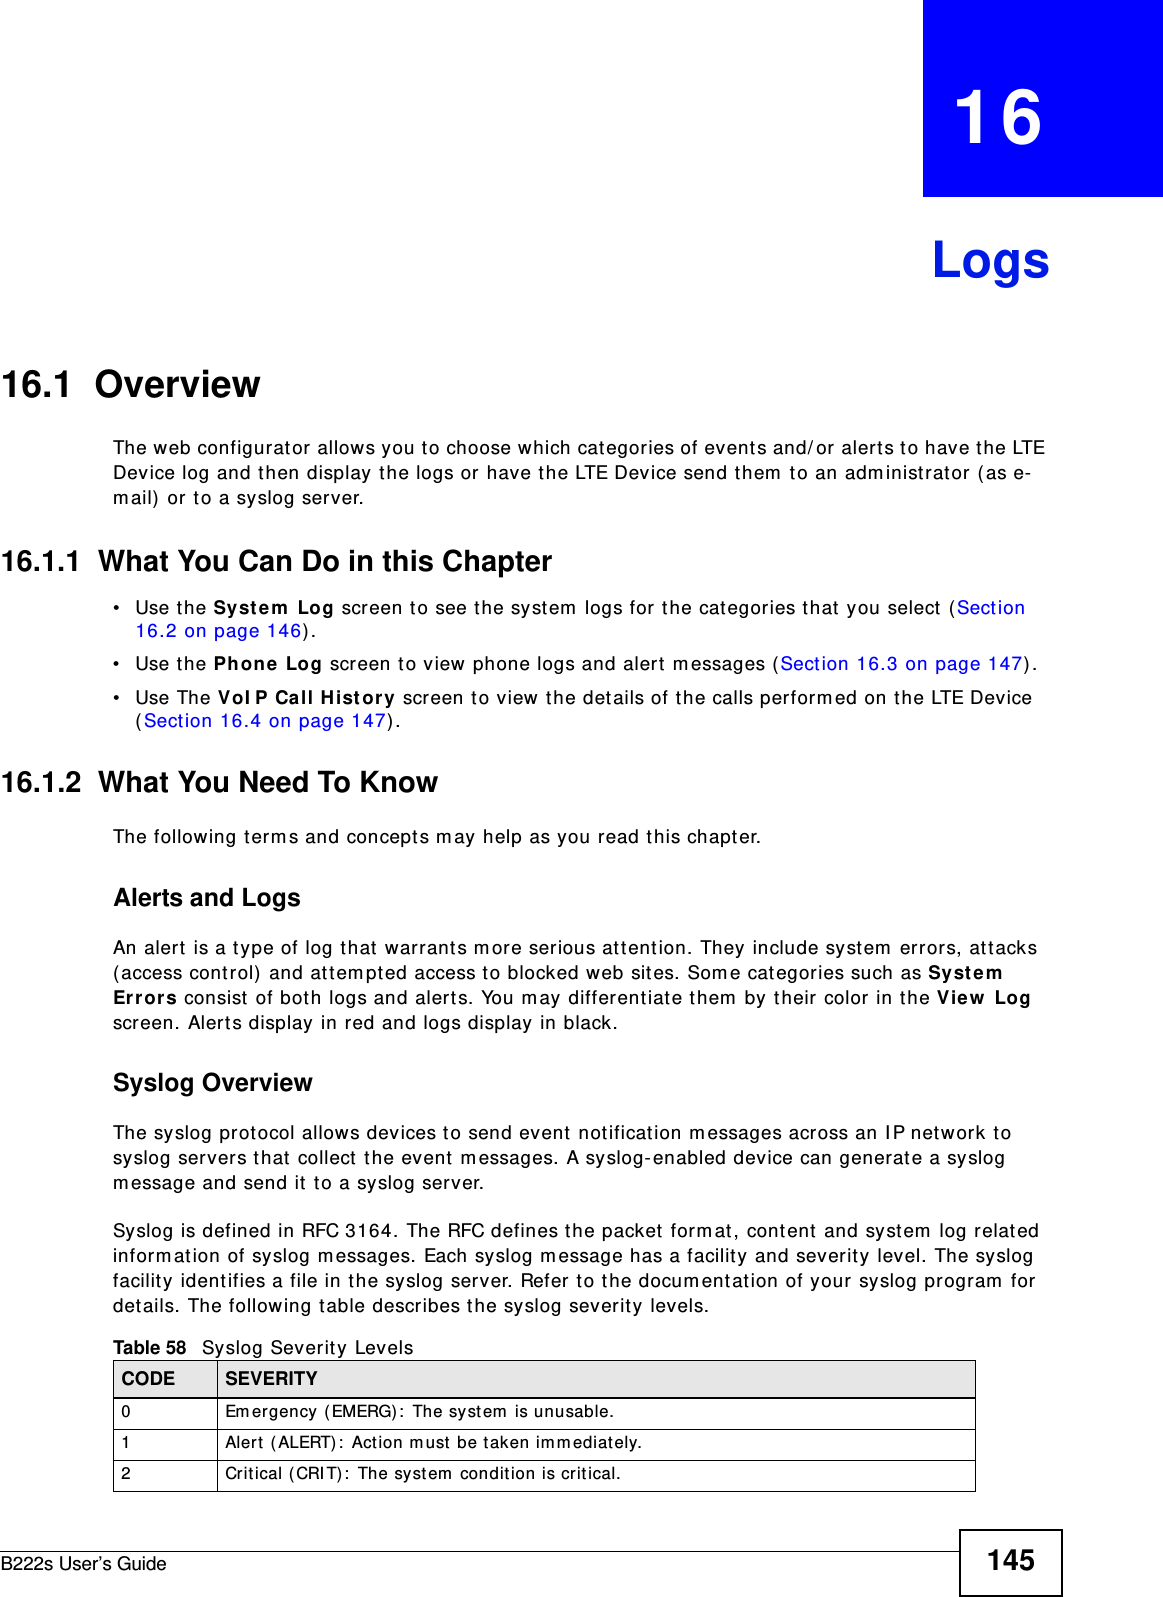 B222s User’s Guide 145CHAPTER   16Logs16.1  Overview The web configurat or allows you to choose w hich cat egories of events and/ or alert s to have t he LTE Device log and t hen display the logs or have t he LTE Device send t hem  t o an adm inistrat or ( as e-m ail)  or t o a syslog server. 16.1.1  What You Can Do in this Chapter• Use the Syst e m  Log screen t o see the syst em  logs for the cat egories t hat  you select  ( Sect ion 16.2 on page 146) .• Use the Ph one Log screen t o view phone logs and alert  m essages (Section 16.3 on page 147) .• Use The VoI P Call H ist or y screen t o view the det ails of t he calls perform ed on t he LTE Device (Section 16.4 on page 147) .16.1.2  What You Need To KnowThe following term s and concept s m ay help as you read this chapt er.Alerts and LogsAn alert  is a t ype of log t hat  warrant s m ore serious at tent ion. They include syst em  errors, att acks ( access control)  and at tem pted access t o blocked web sites. Som e categories such as Syst em  Er r or s consist  of bot h logs and alert s. You m ay different iat e t hem  by t heir color in the Vie w  Log screen. Alert s display in red and logs display in black.Syslog Overview The syslog prot ocol allow s devices to send event  not ification m essages across an I P net work t o syslog servers t hat  collect the event  m essages. A syslog-enabled device can generat e a syslog m essage and send it  t o a syslog server.Syslog is defined in RFC 3164. The RFC defines t he packet form at , cont ent  and system  log relat ed inform ation of syslog m essages. Each syslog m essage has a facilit y and severit y level. The syslog facilit y ident ifies a file in t he syslog server. Refer  t o t he docum ent at ion of your syslog program  for det ails. The following t able describes t he syslog severity levels. Table 58   Syslog Severit y LevelsCODE SEVERITY0 Em ergency ( EMERG) :  The system  is unusable.1 Alert ( ALERT):  Act ion m ust  be taken im m ediately.2 Crit ical (CRI T) :  The syst em  condit ion is crit ical.